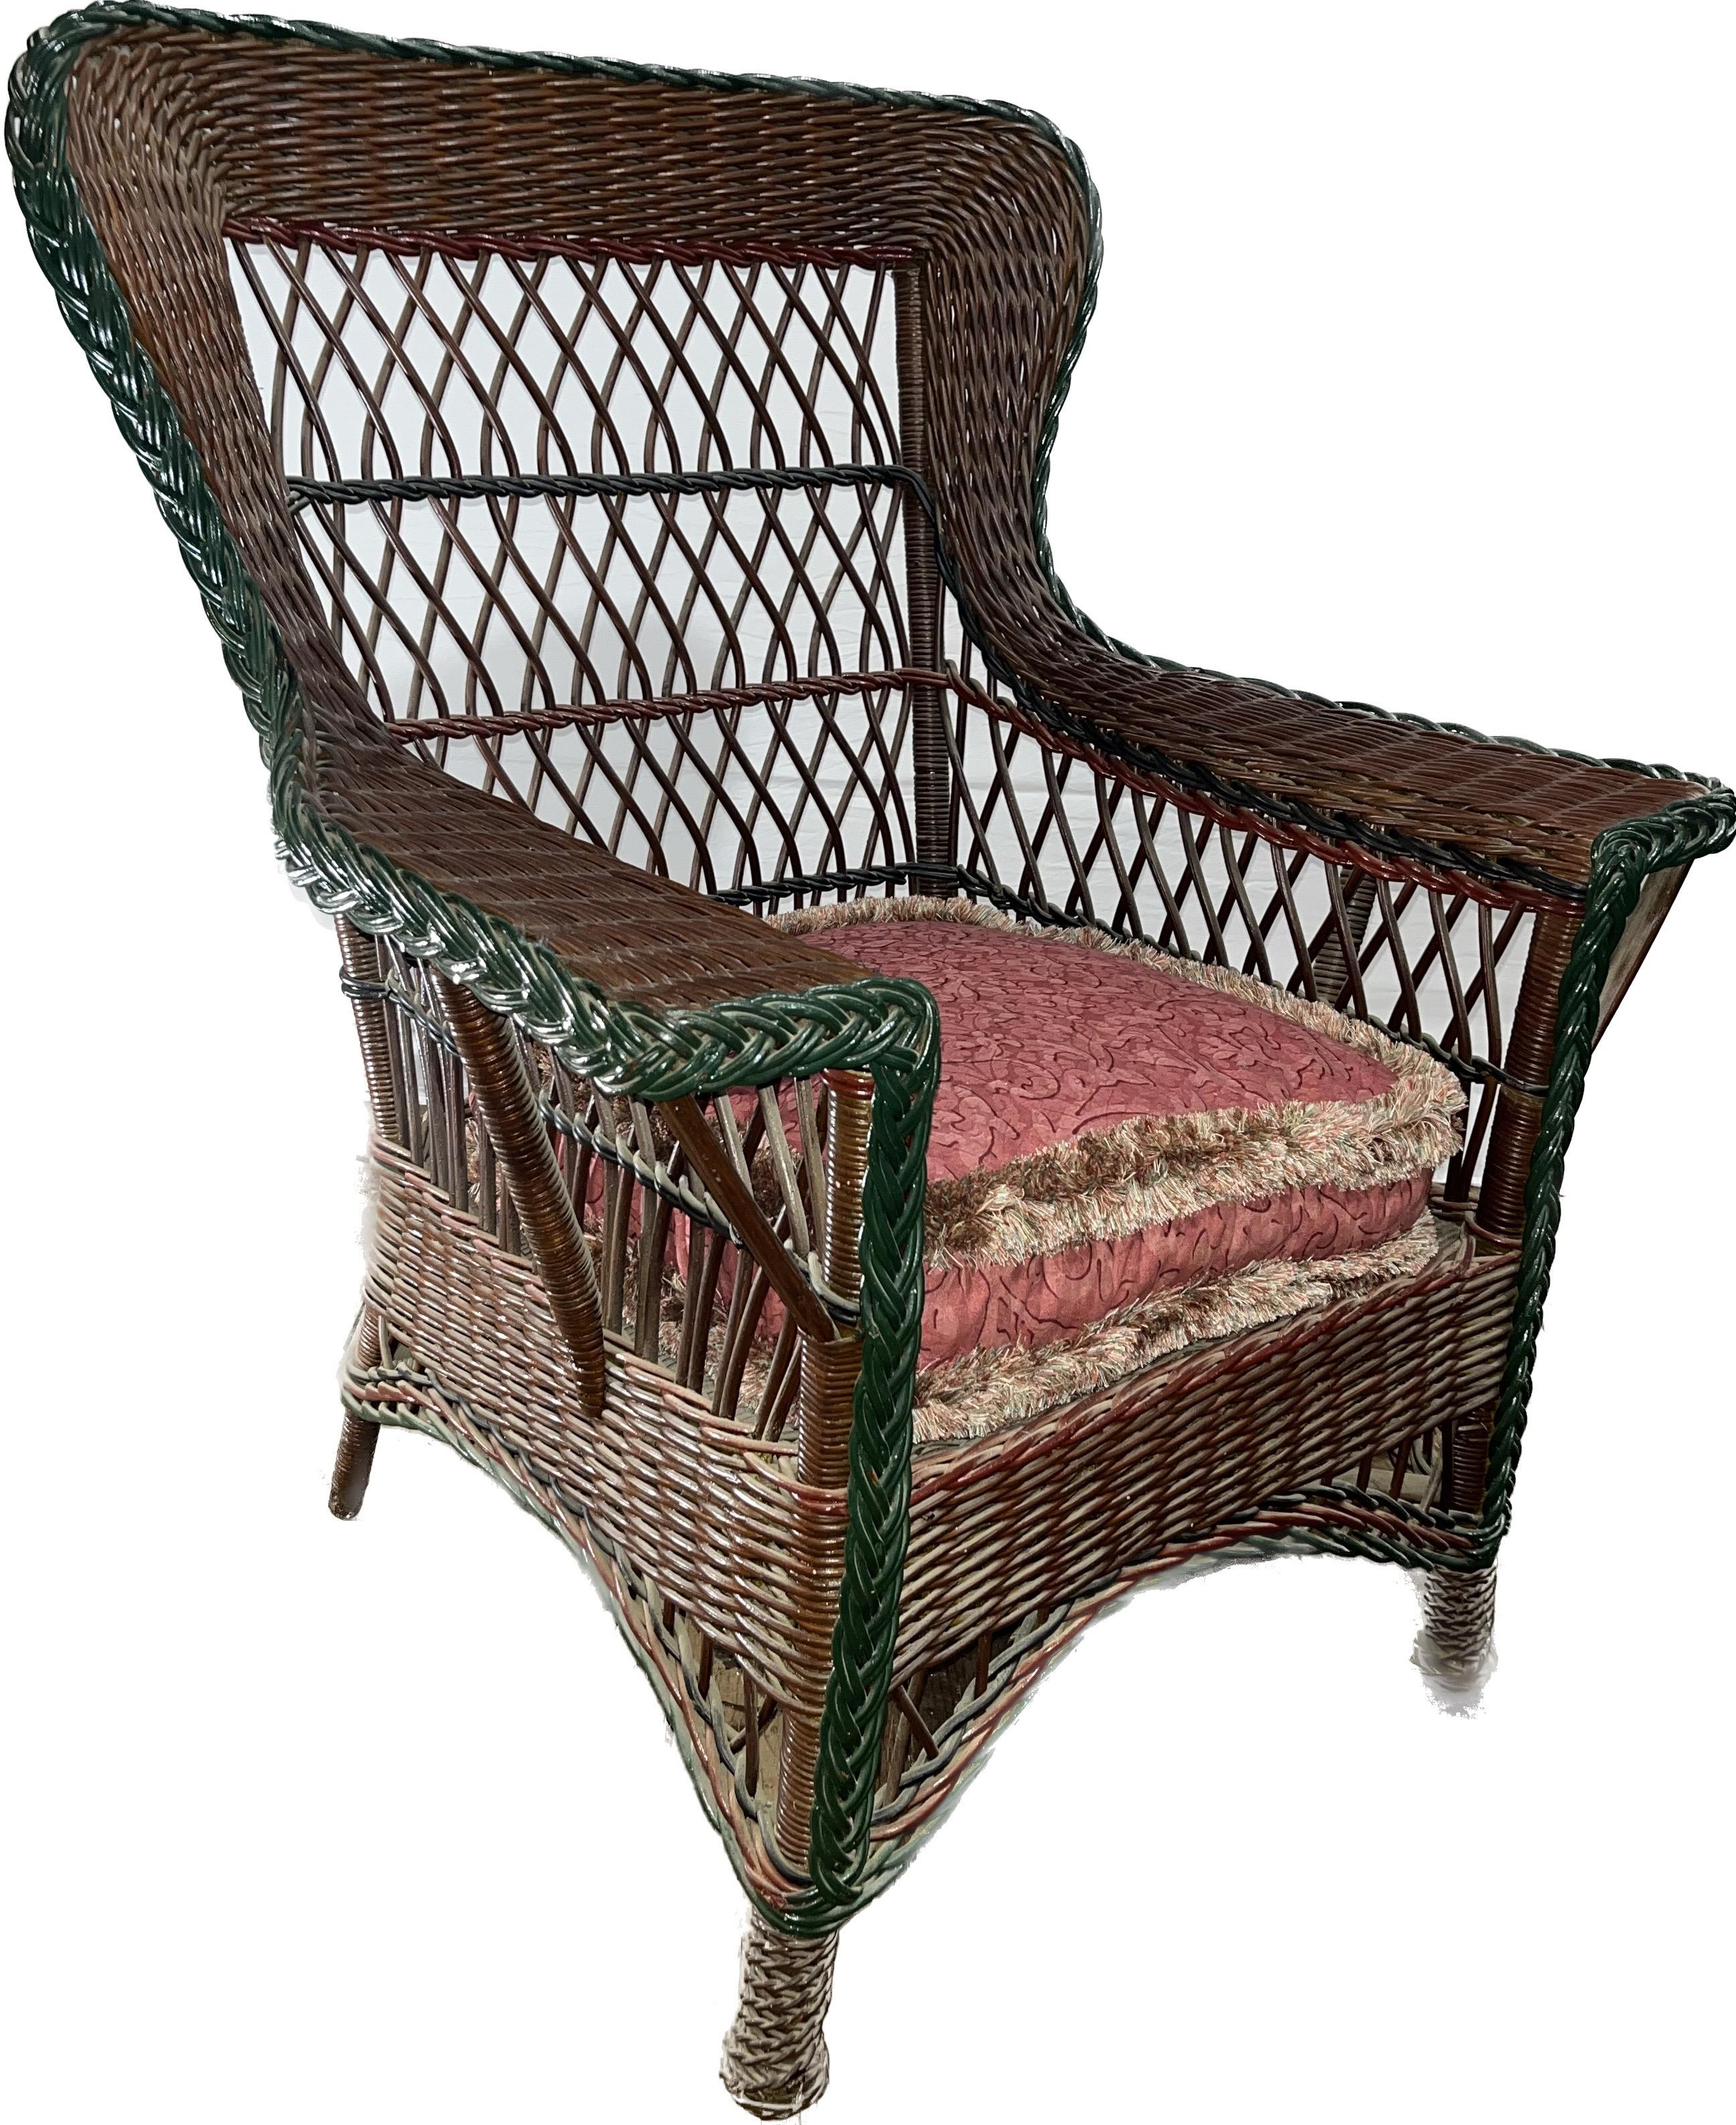 American Antique Bar Harbor Style Wicker Wing Chair in Natural Finish with Green Trim